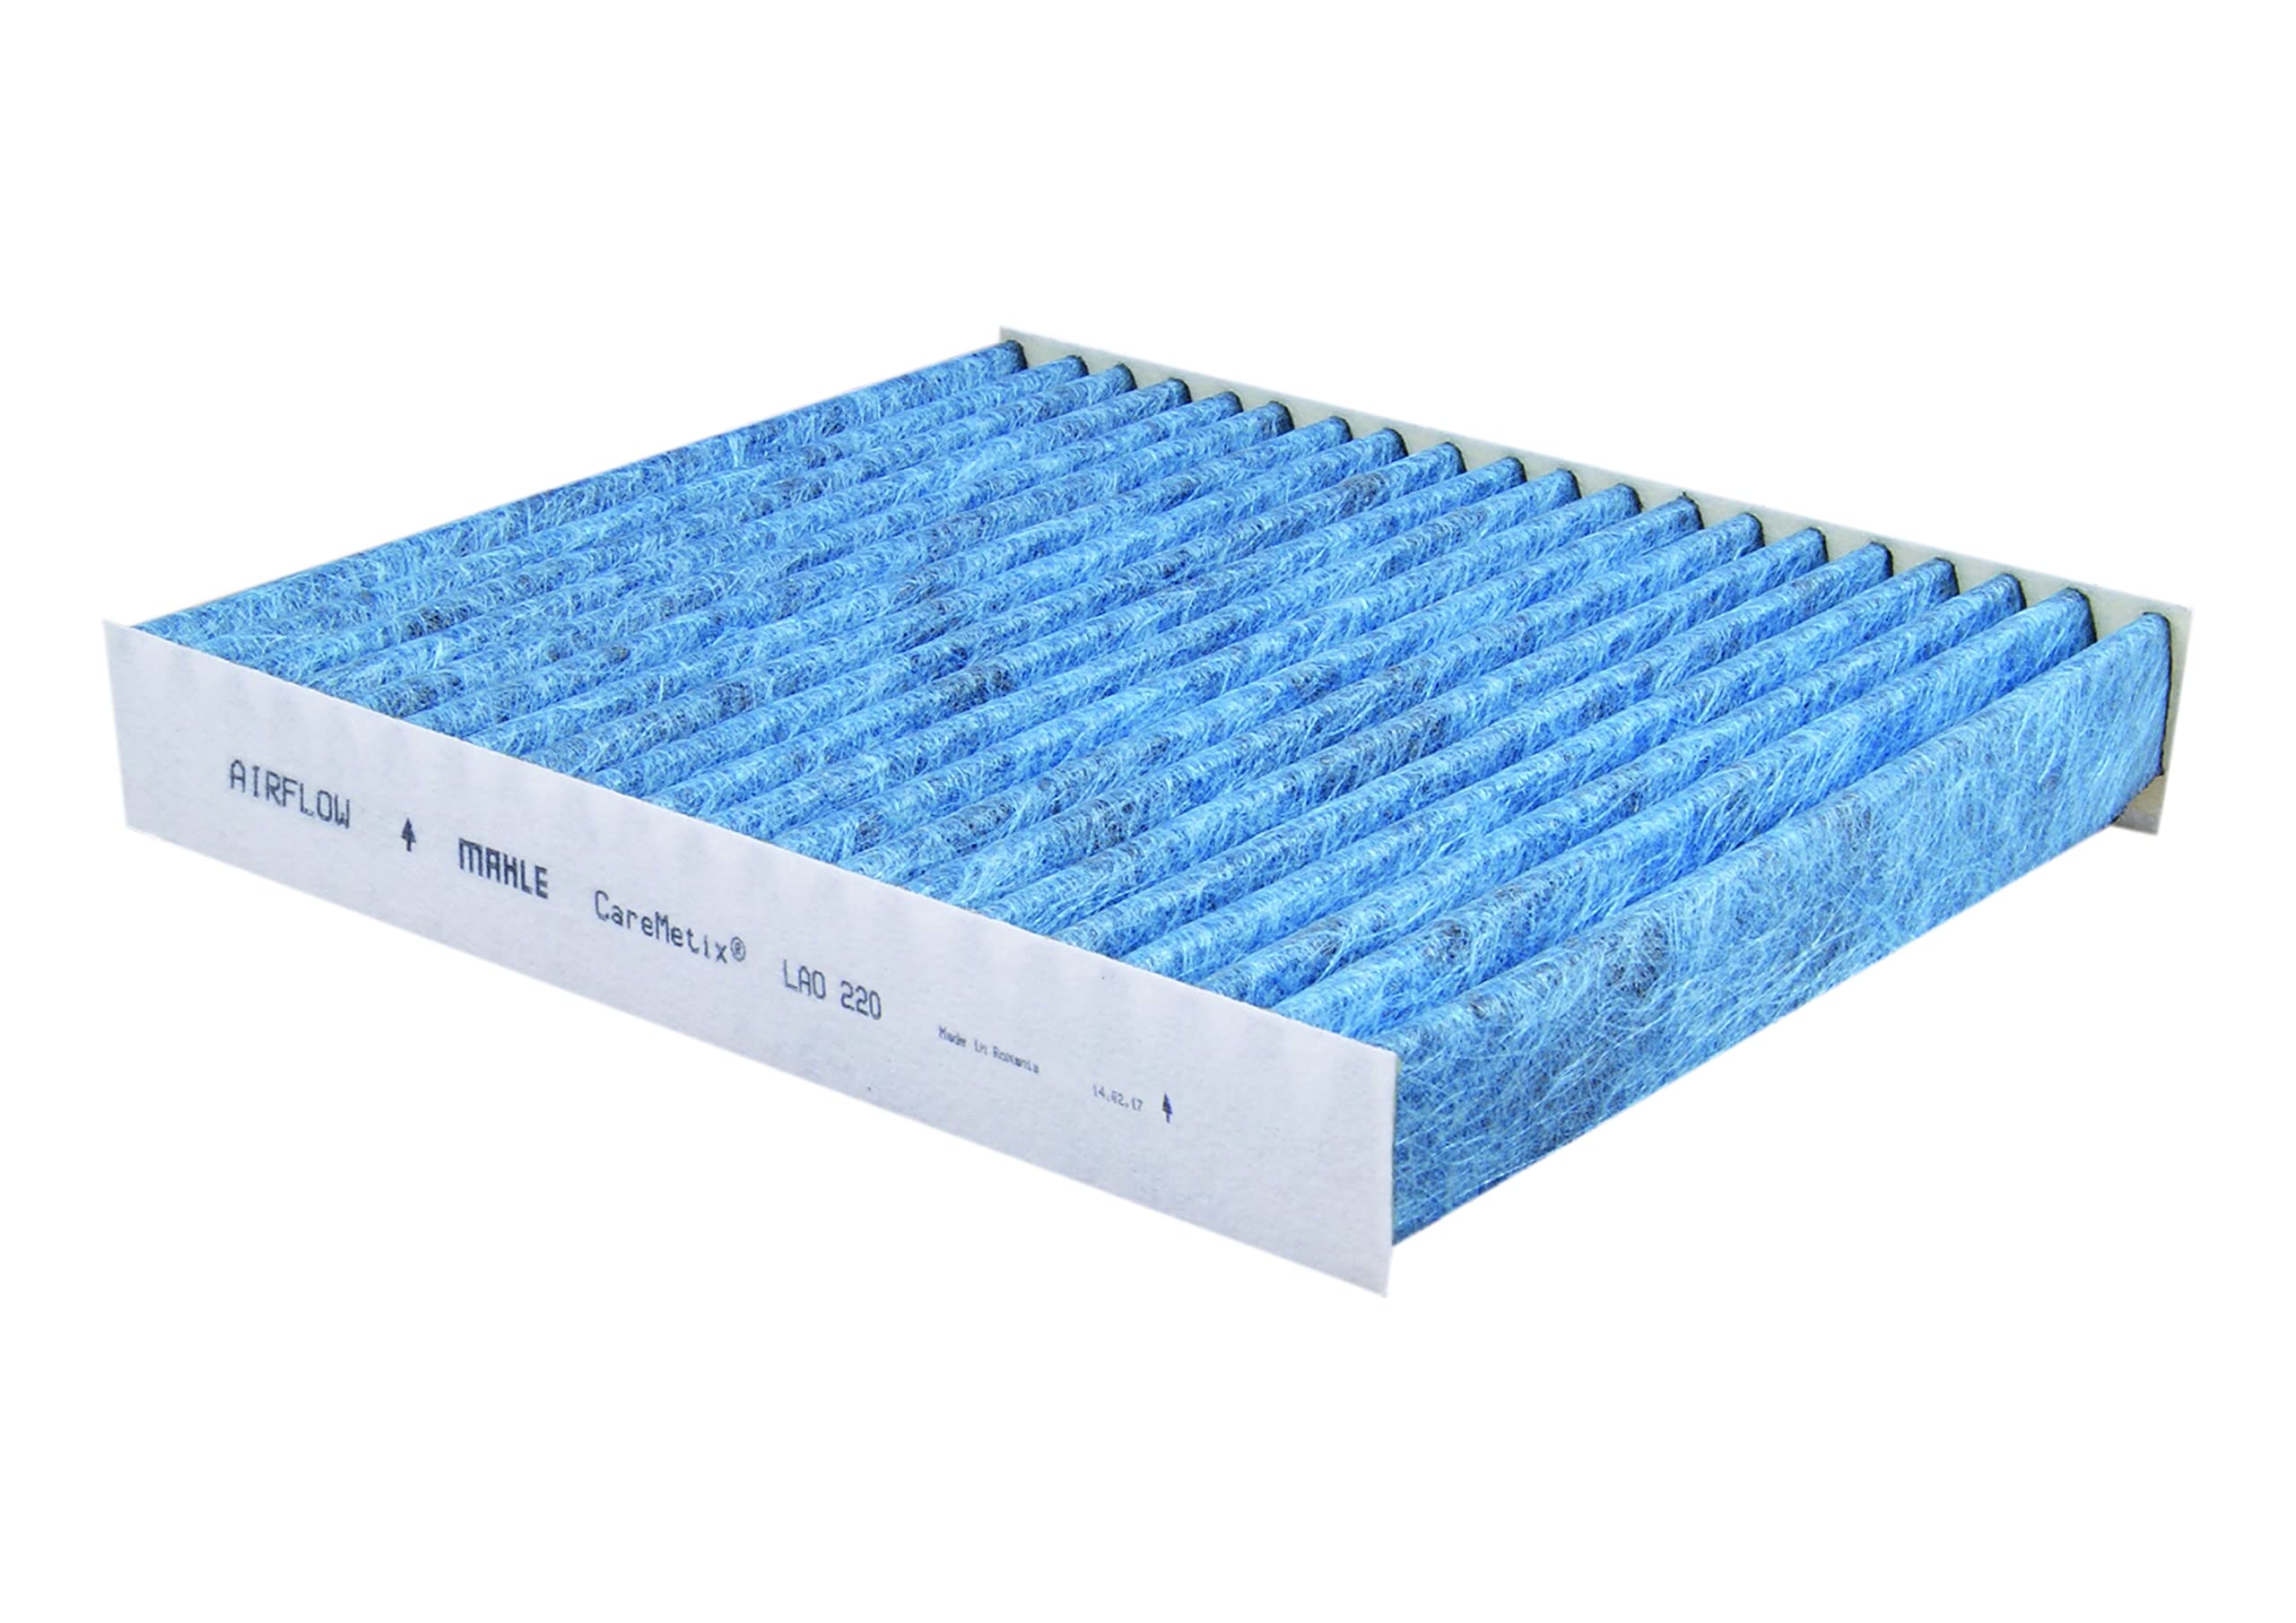 MAHLE Cabin Air Filter LAO 220